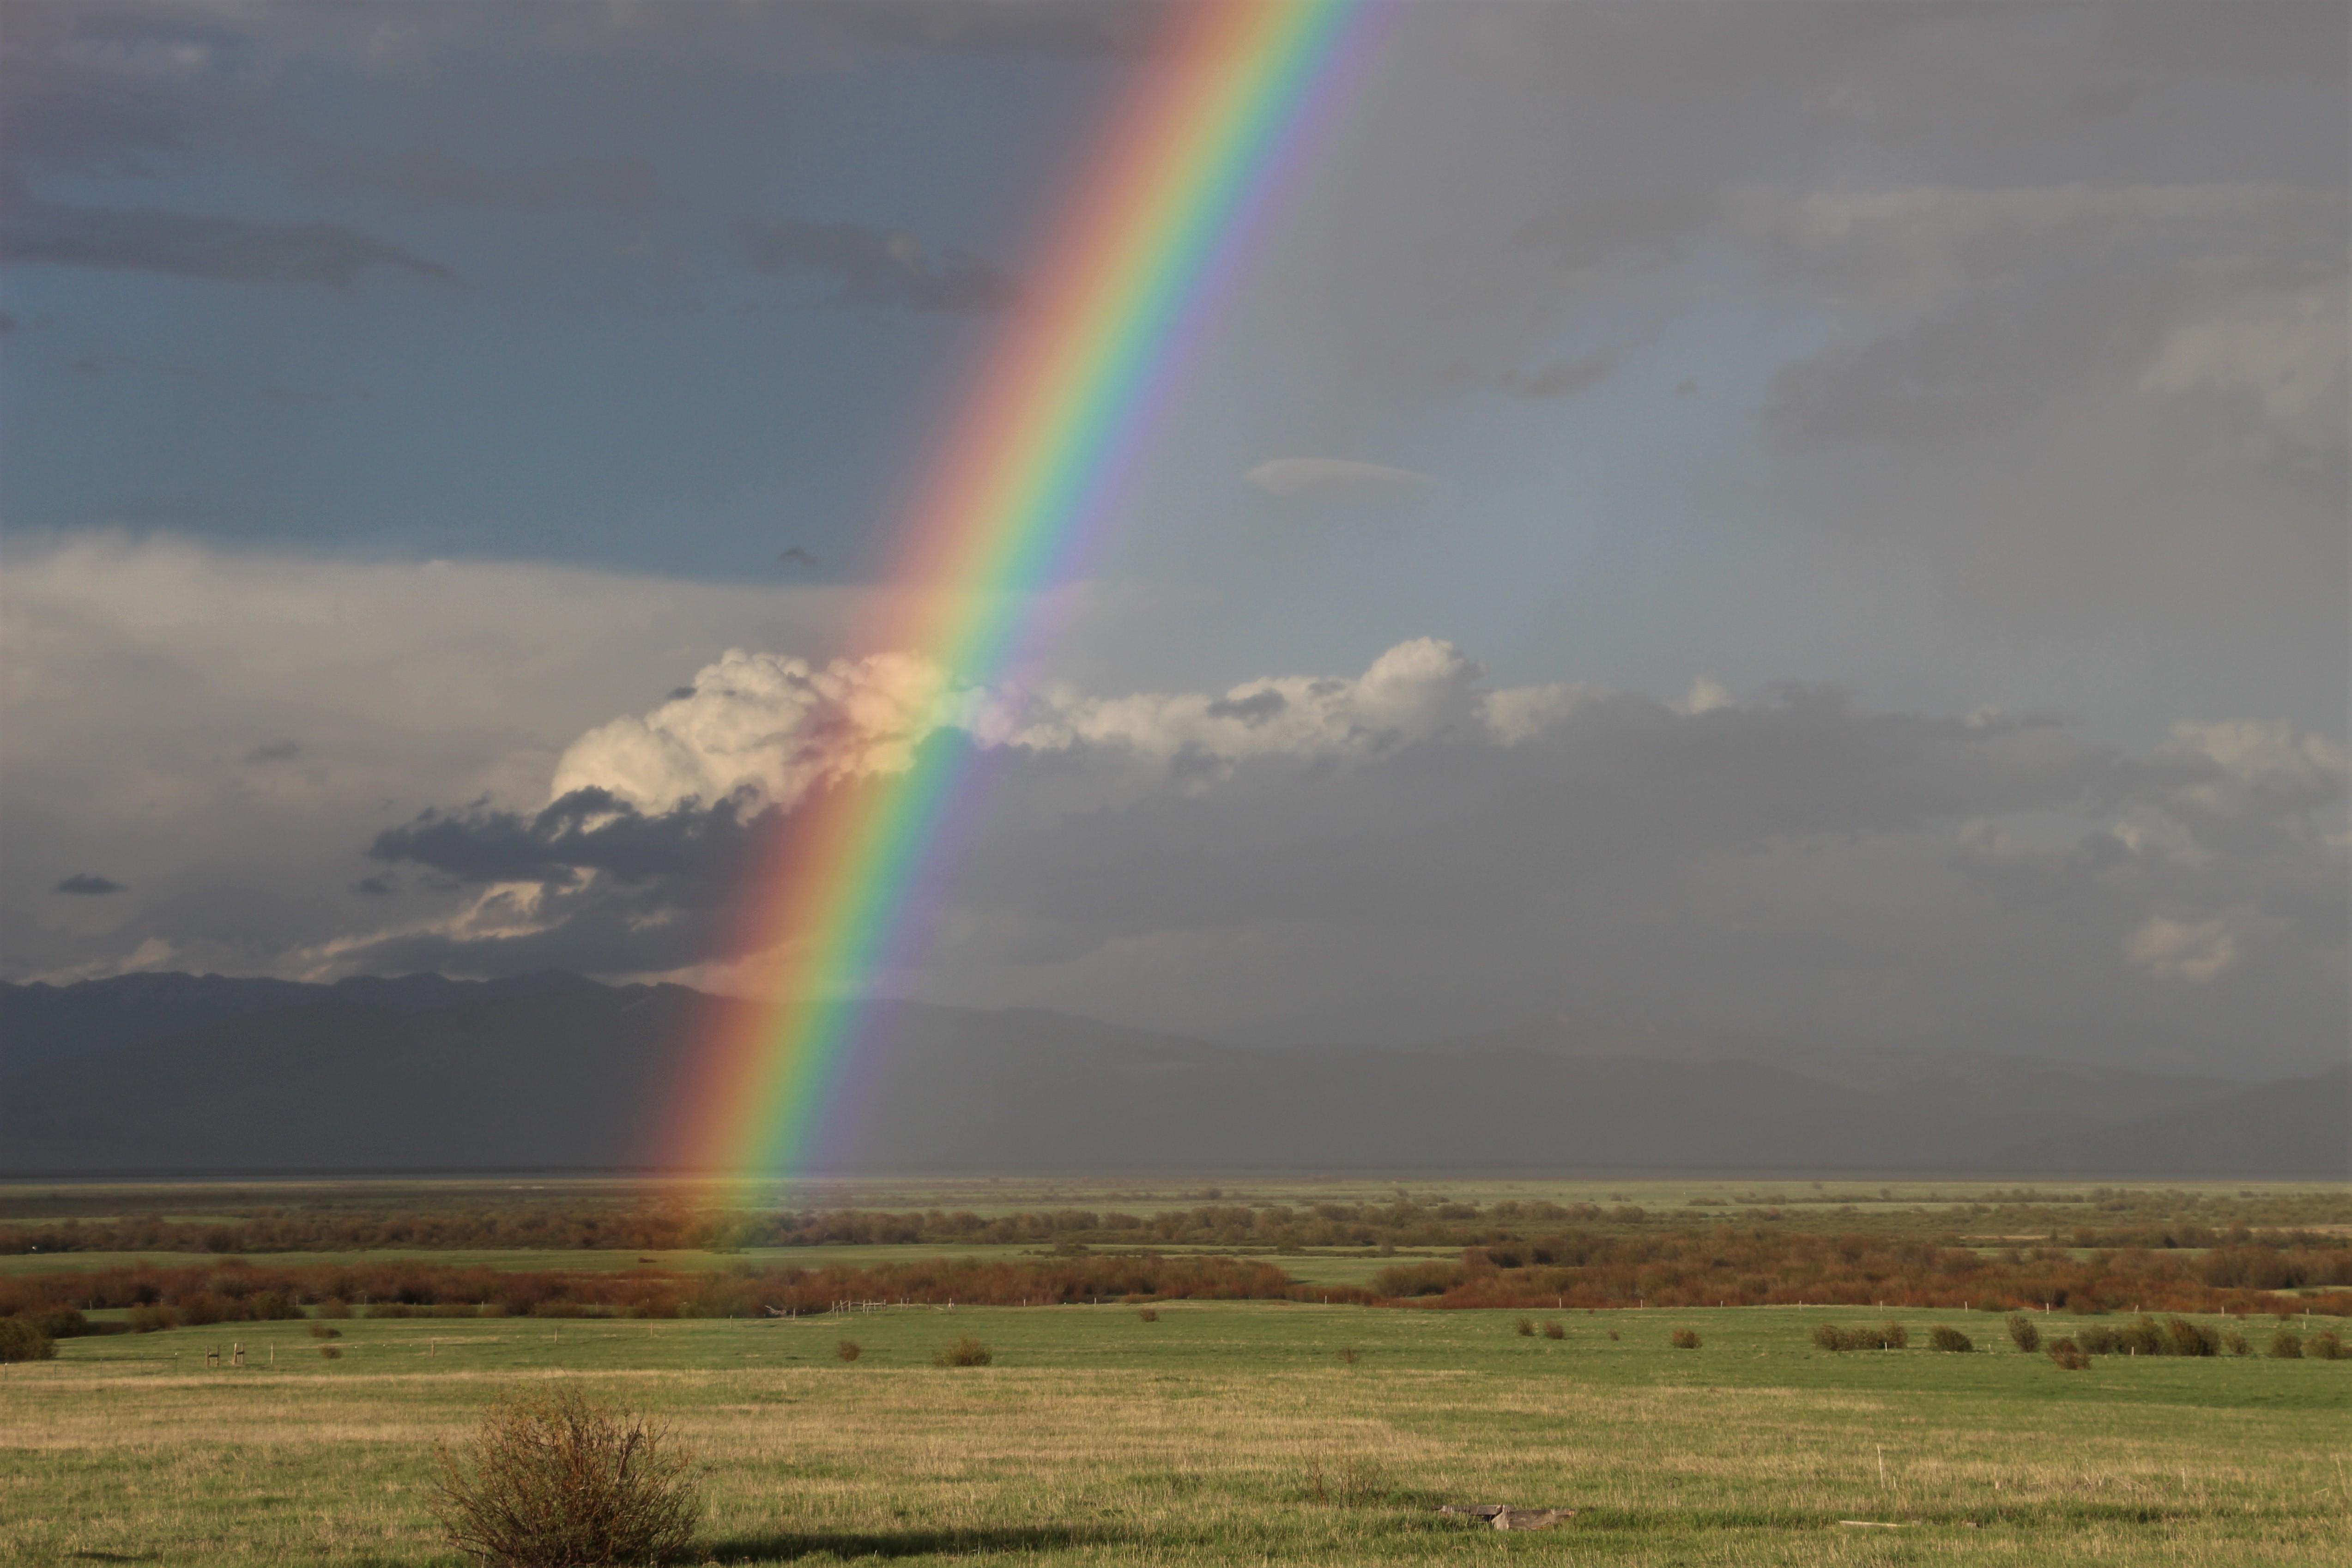 A brilliantly colored rainbow can be seen touching Red Rock Lakes National Wildlife Refuge's green valley floor as blue and white clouds recede in the background.